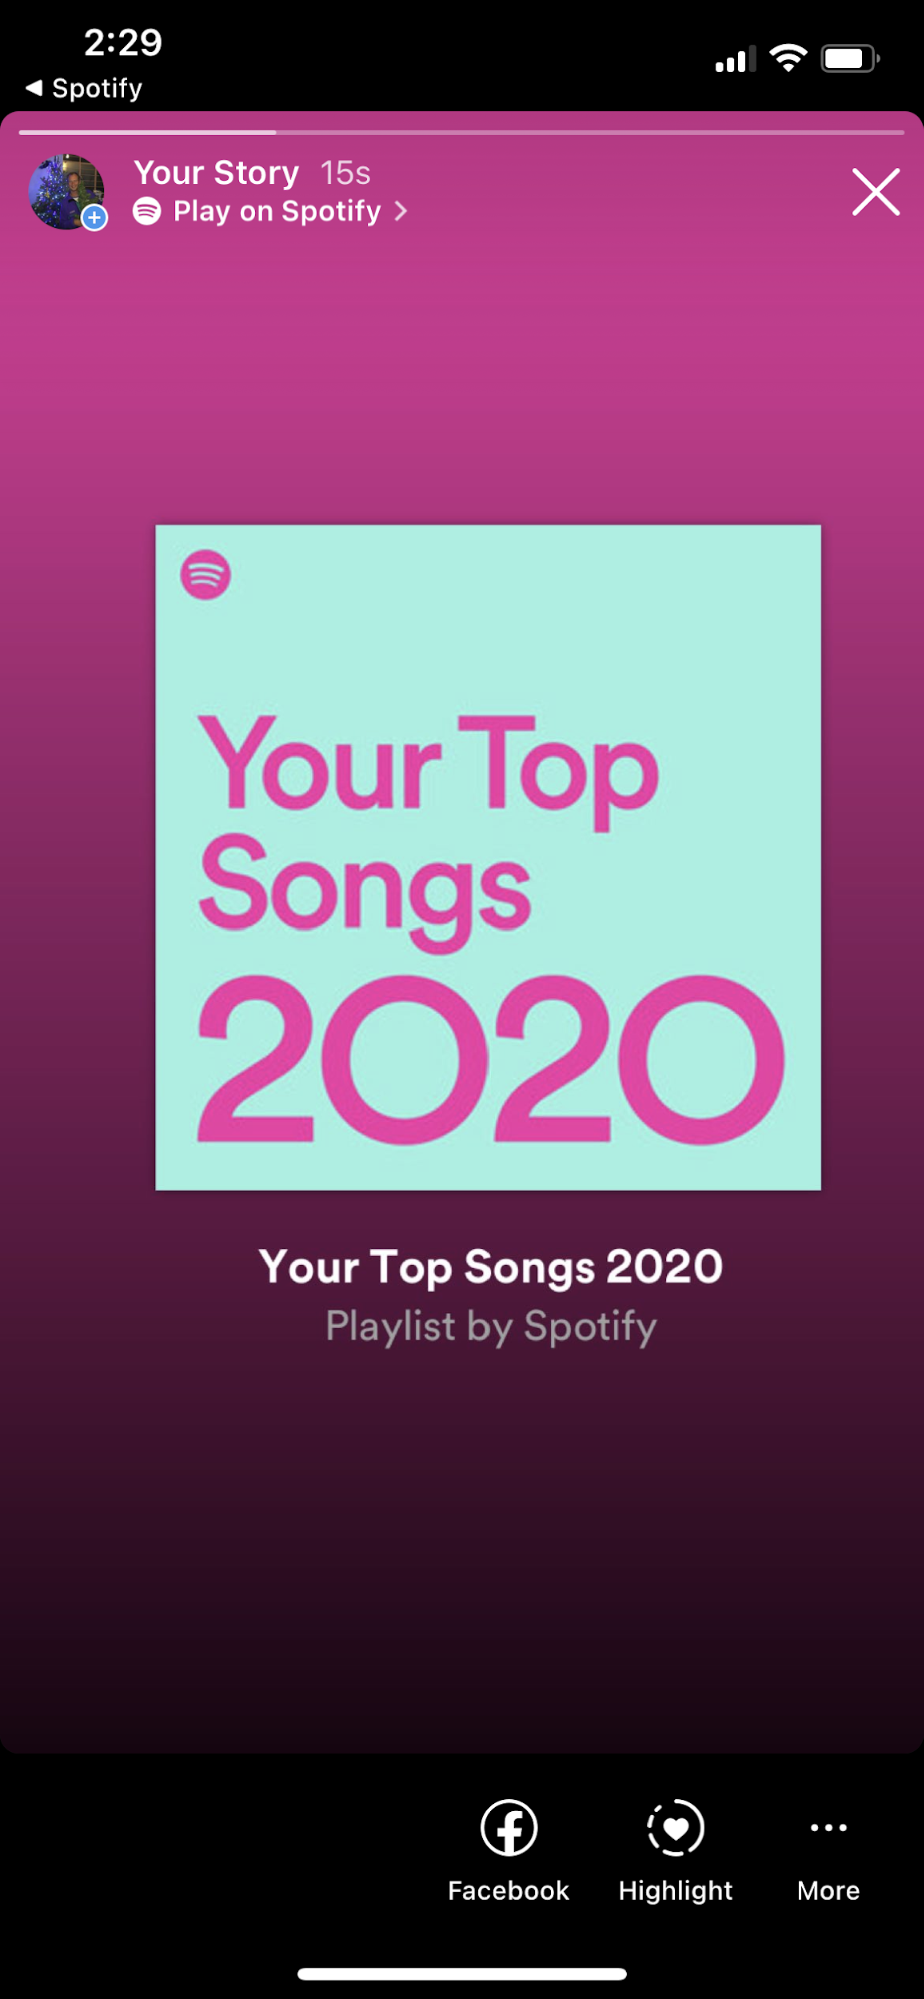 Sharing a Spotify Wrapped 2020 playlist to Instagram.